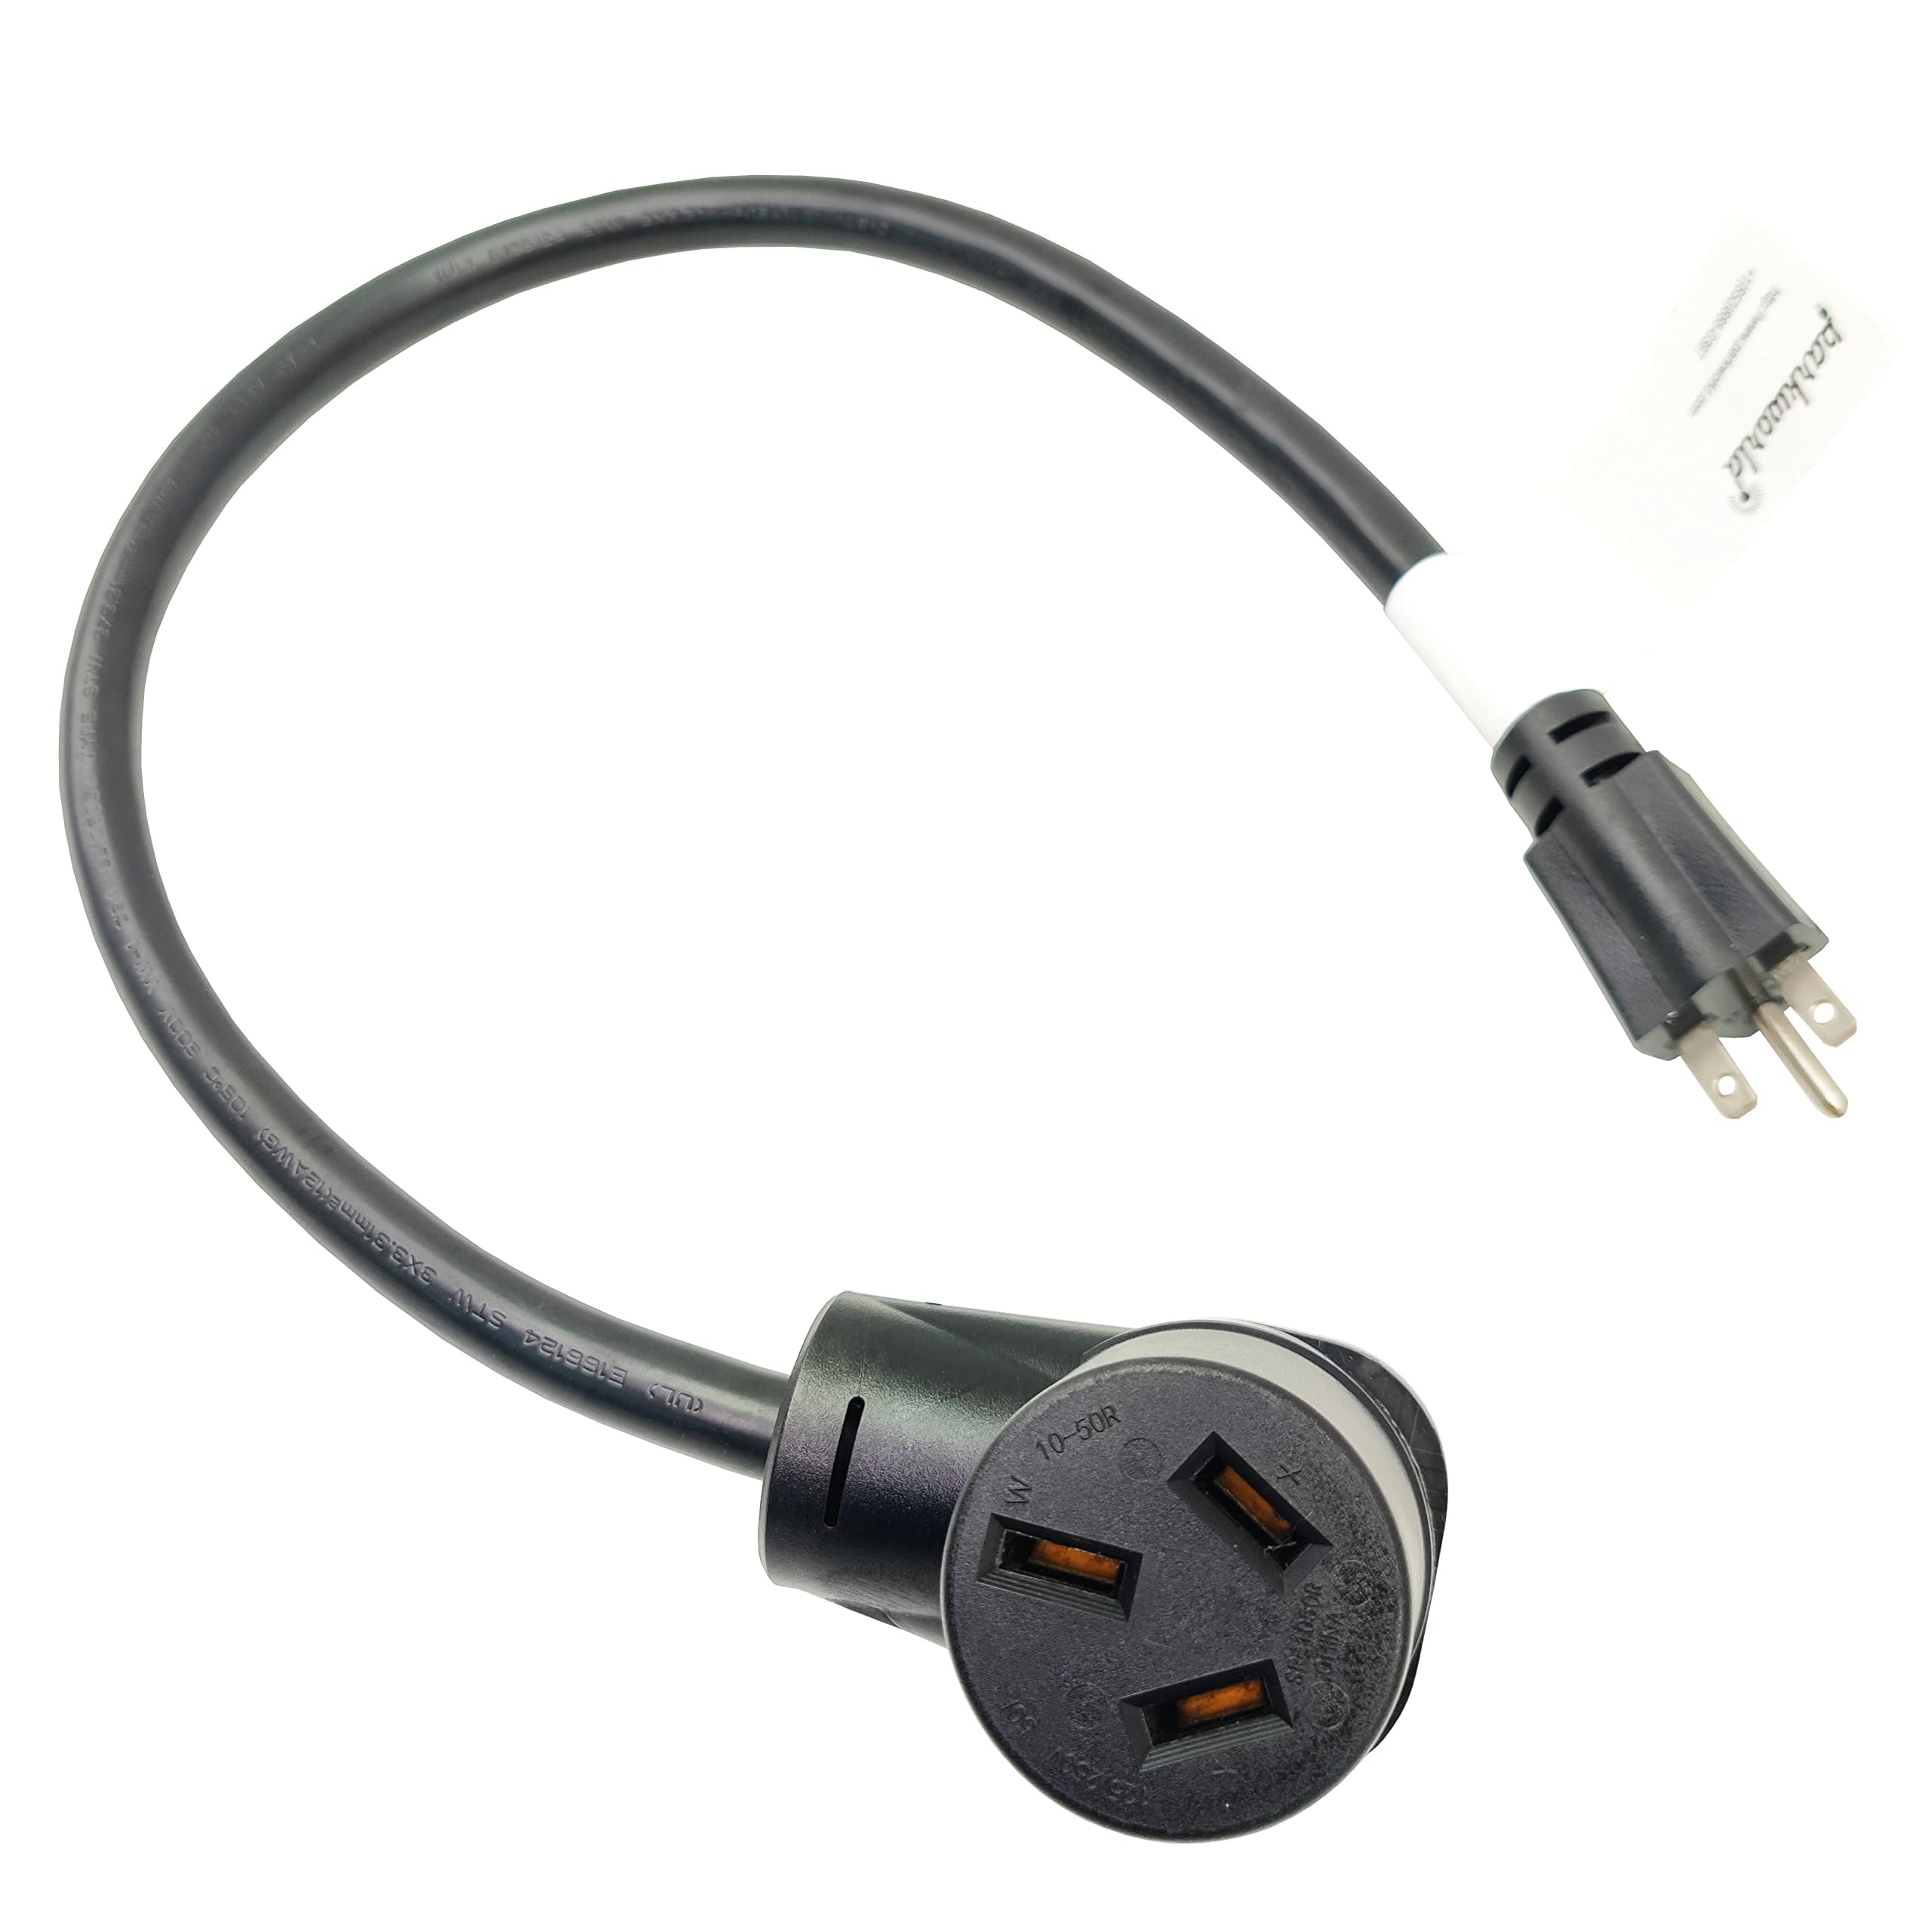 Parkworld 61643A Adapter Cord A/C 3 Prong Plug 6-15P to 10-50R Electric  Stove Receptacle, NEMA 6-15 Dryer Male to NEMA 10-50R Electrical Stove  Female, ONLY Output 15A, 250V 2FT | Stromversorgungskabel